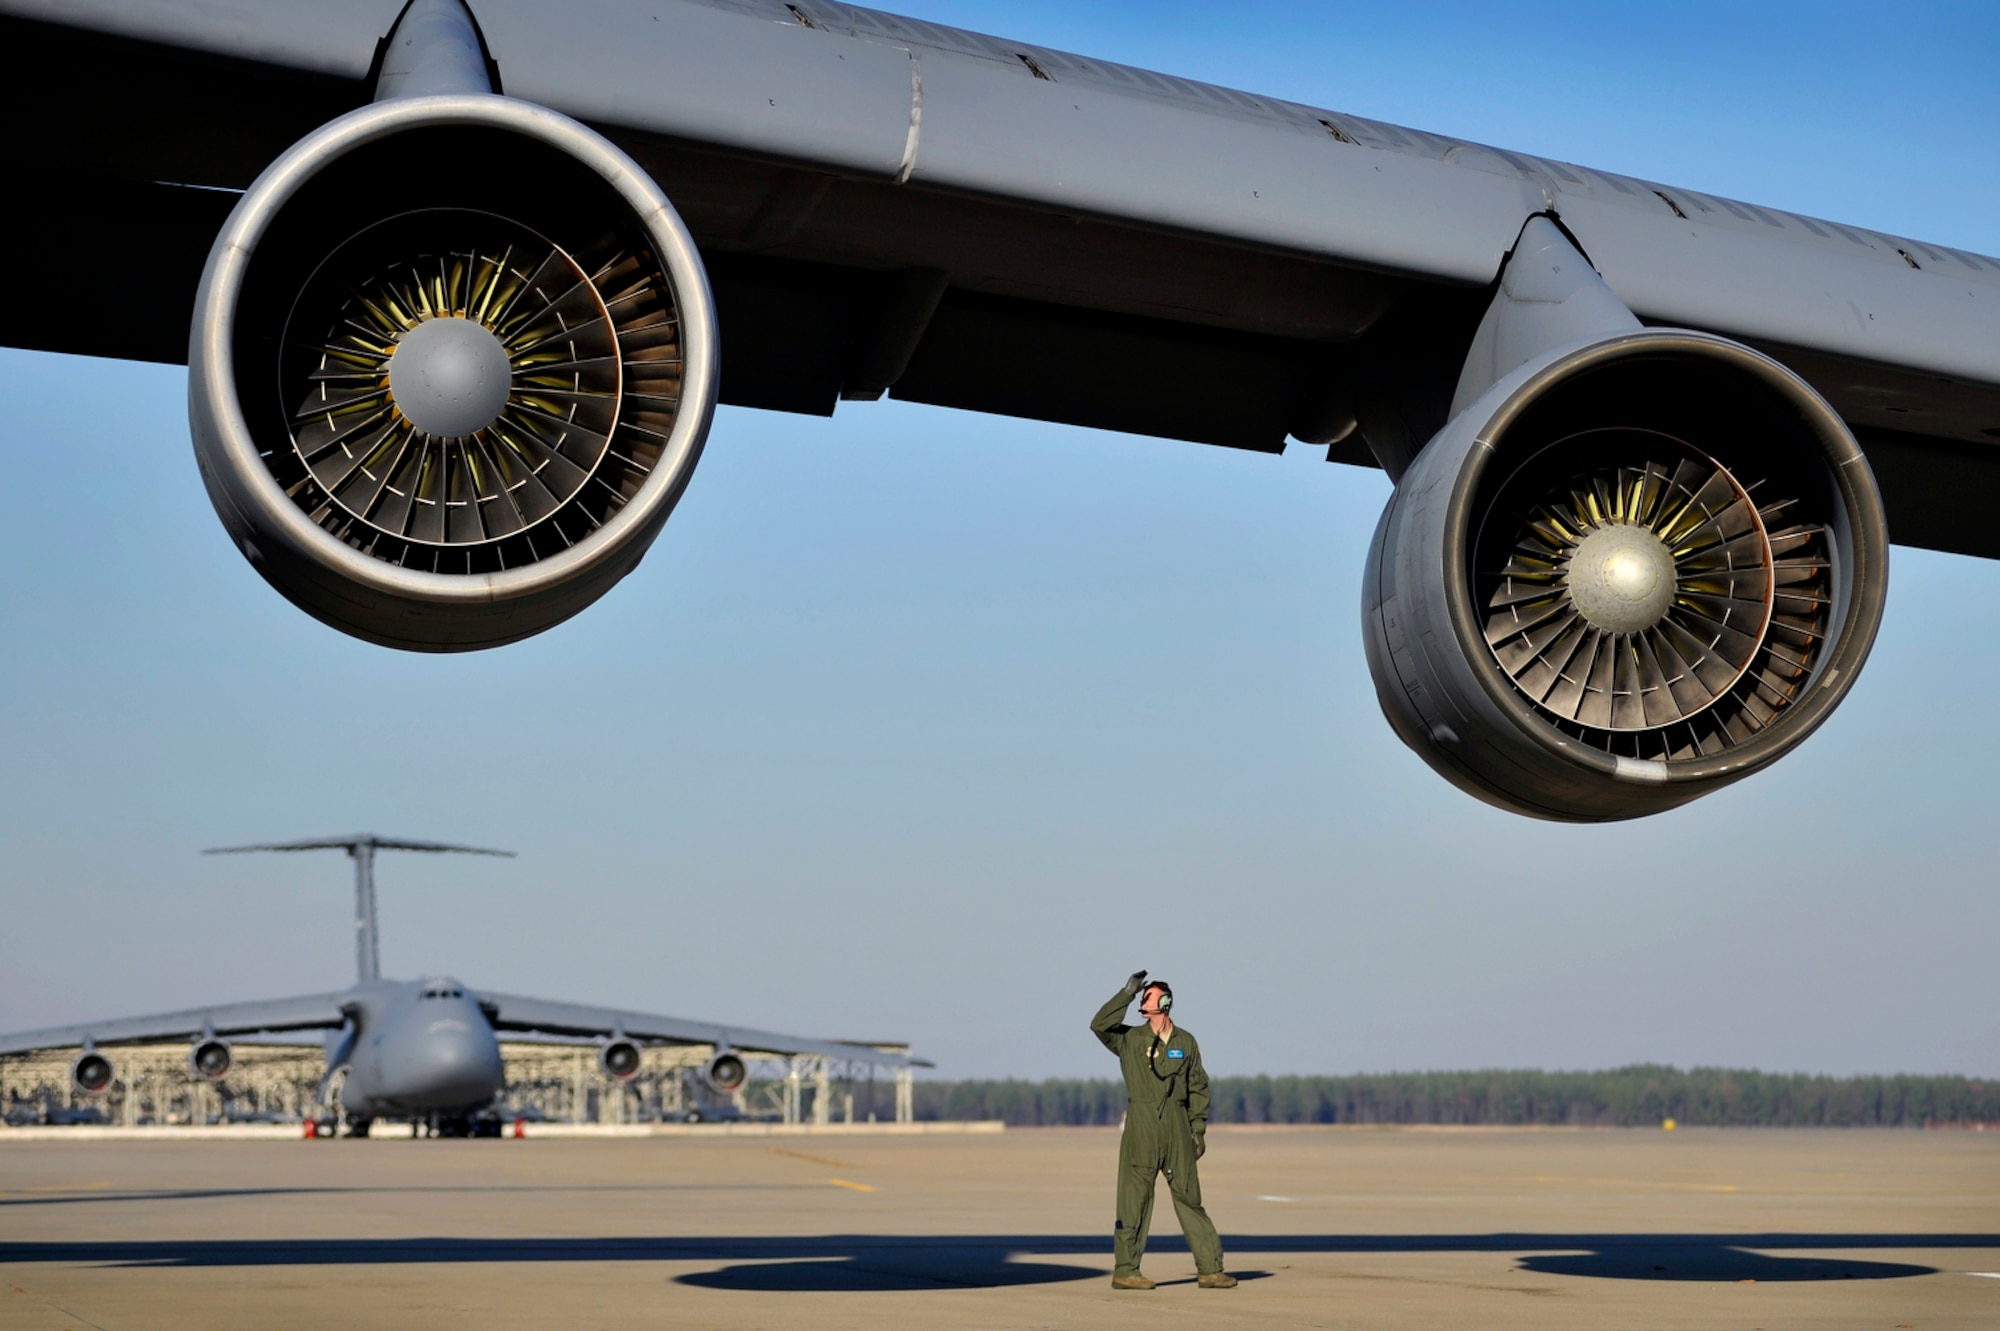 U.S. Air Force Tech. Sgt. Ryan Mozingo, 9th Airlift Squadron crew chief, performs a post flight inspection on C-5 Galaxy aircraft after arriving at Shaw Air Force Base, S.C., Jan. 6, 2012. Three C-5s landed at Shaw over a three day period to pick up airmen and supplies in support of a deployment tasking to Kunsan Air Base, South Korea. (U.S. Air Force photo/Senior Airman Kenny Holston)